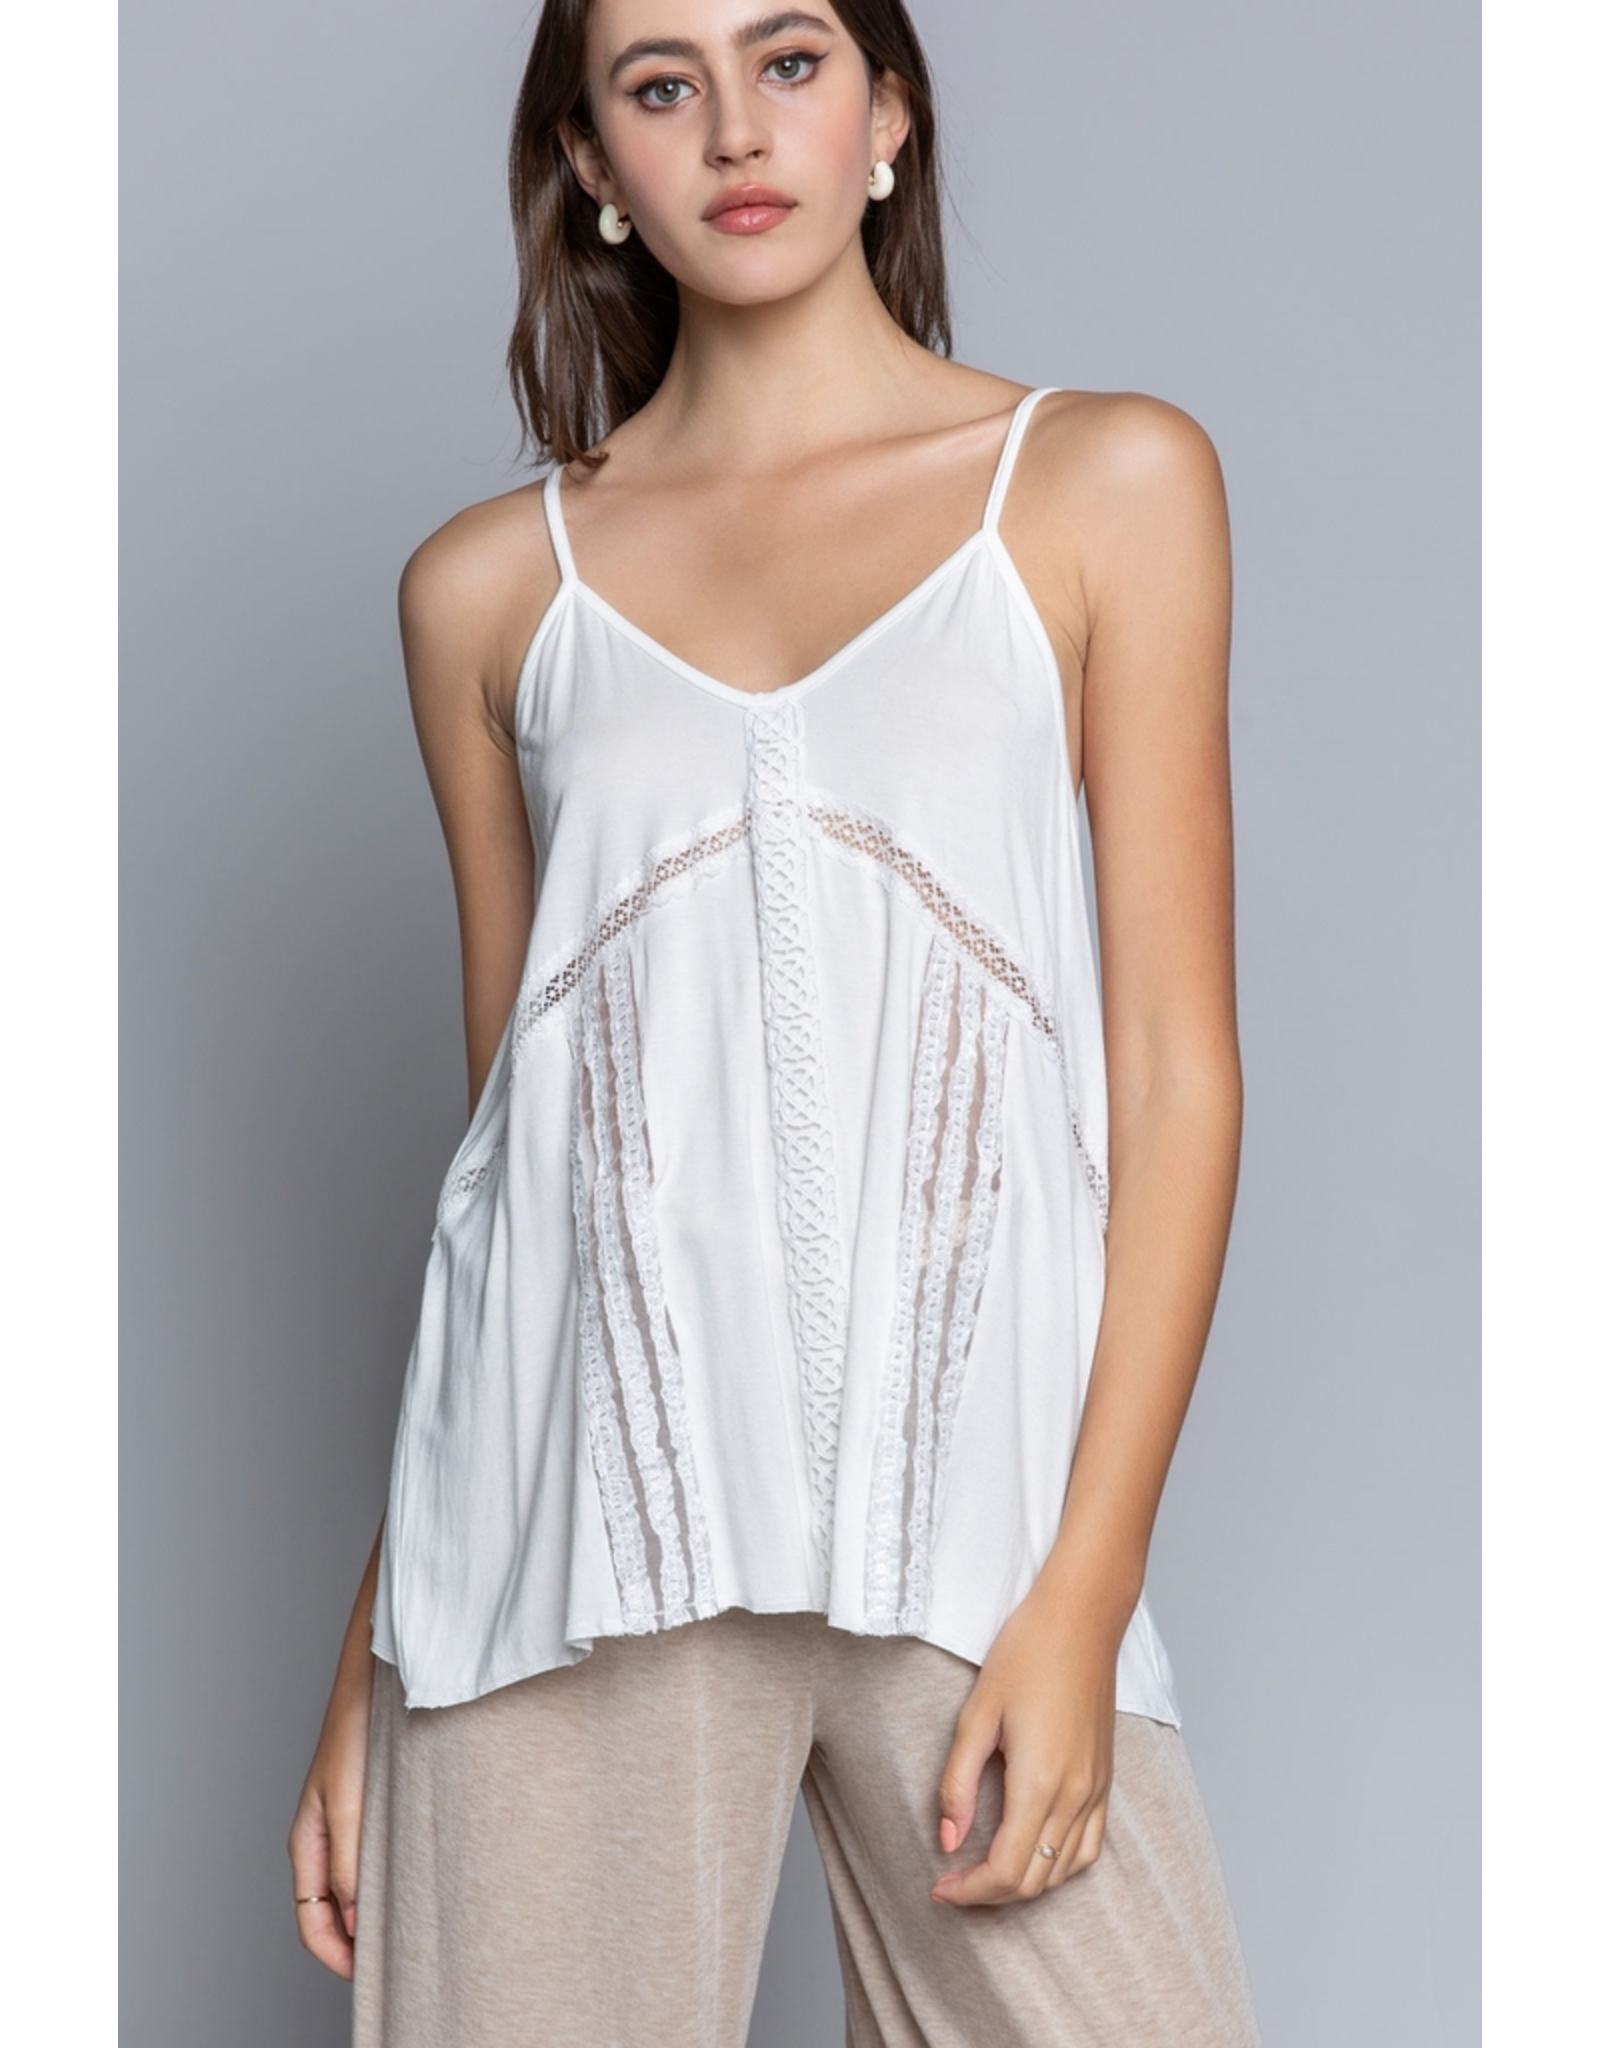 V-Neck Tank Top with Lace Trim